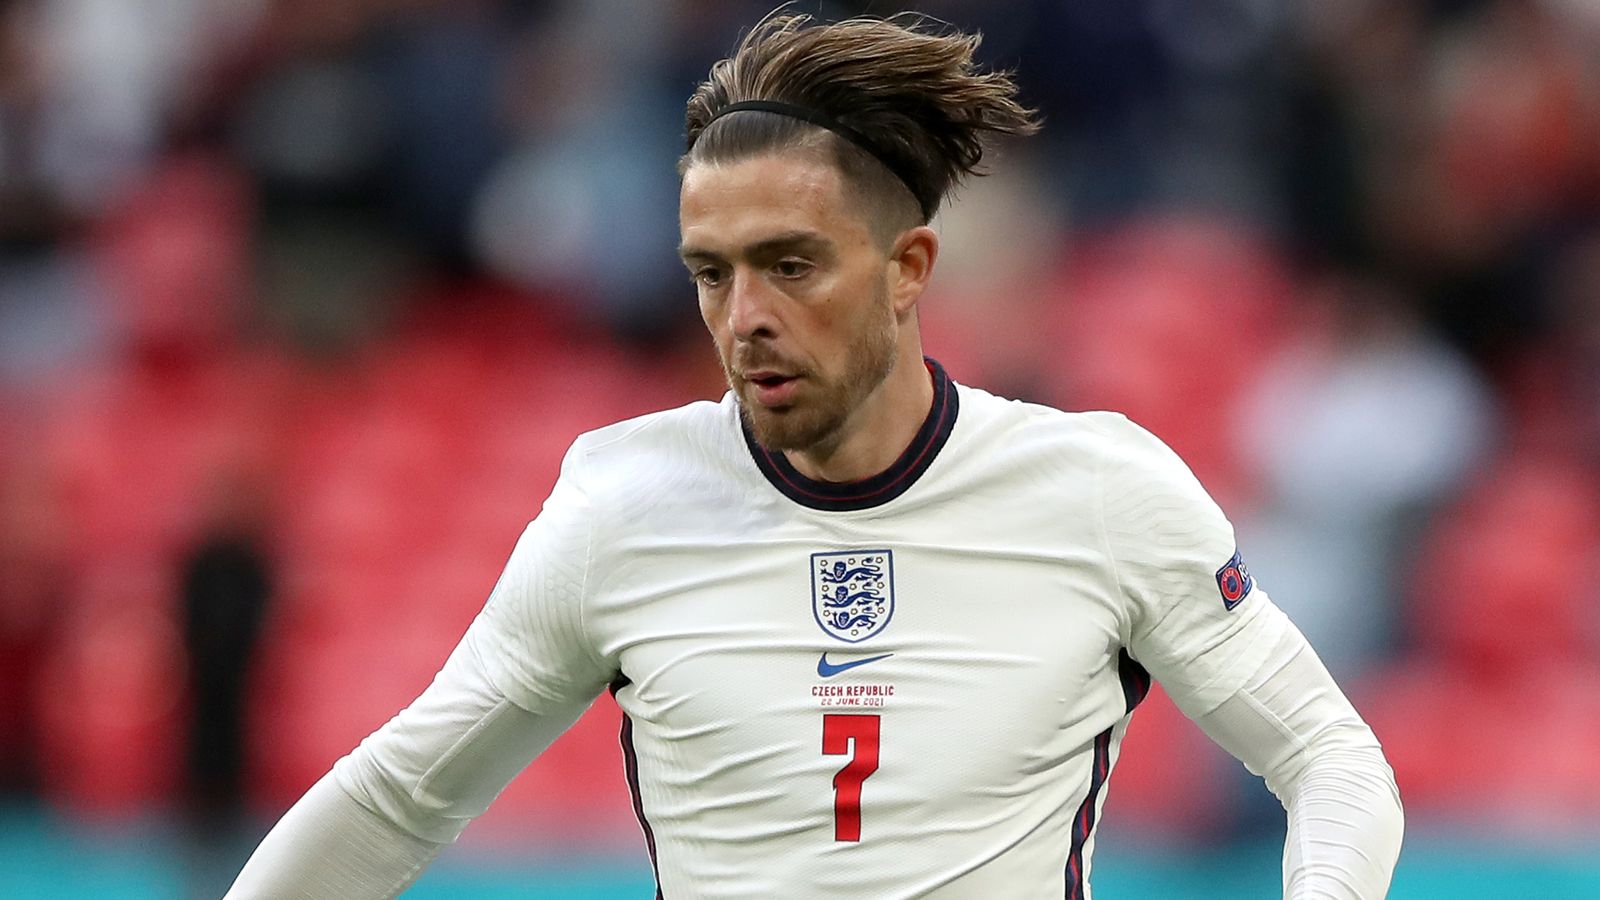 Euro 2020 England S Jack Grealish Aspires To Emulate Paul Gascoigne And Wayne Rooney After The Start Of The First Major Tournament Football News Insider Voice